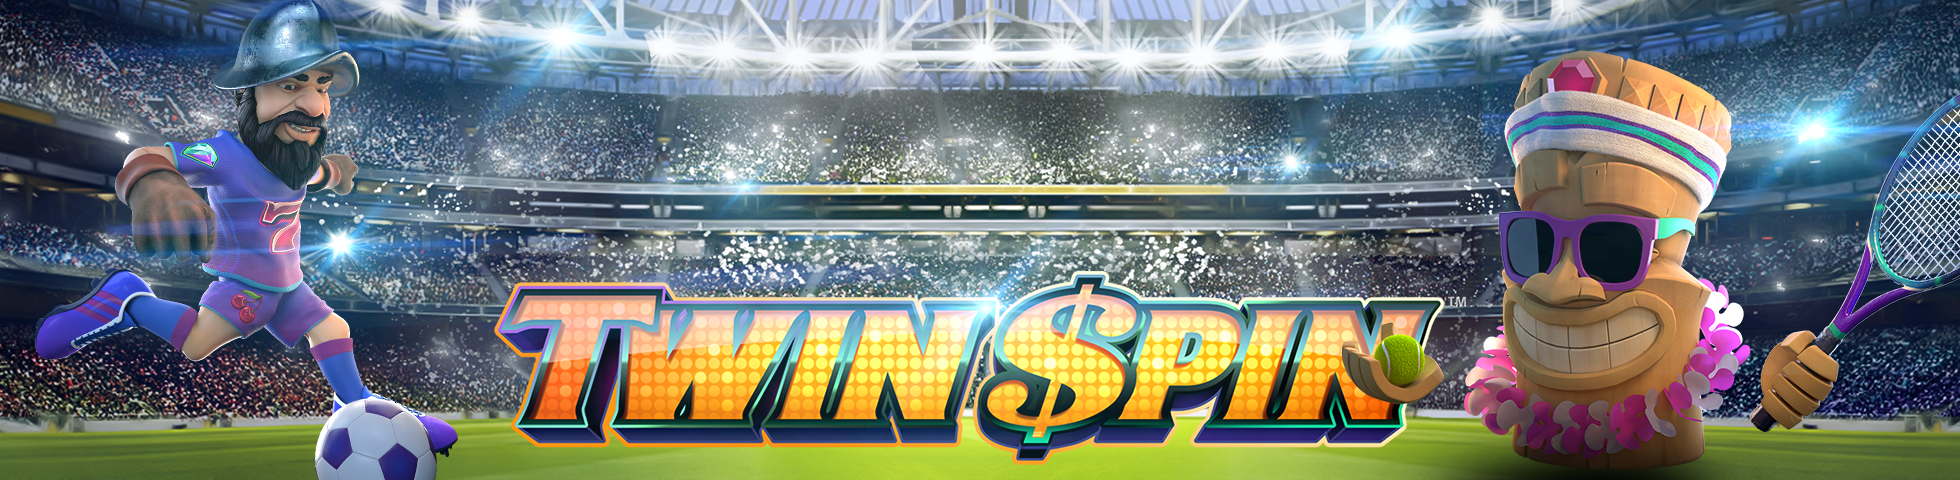 03_desktop_banner_1960x480_sports_twinspin_additionalsportsassets.png thumbnail